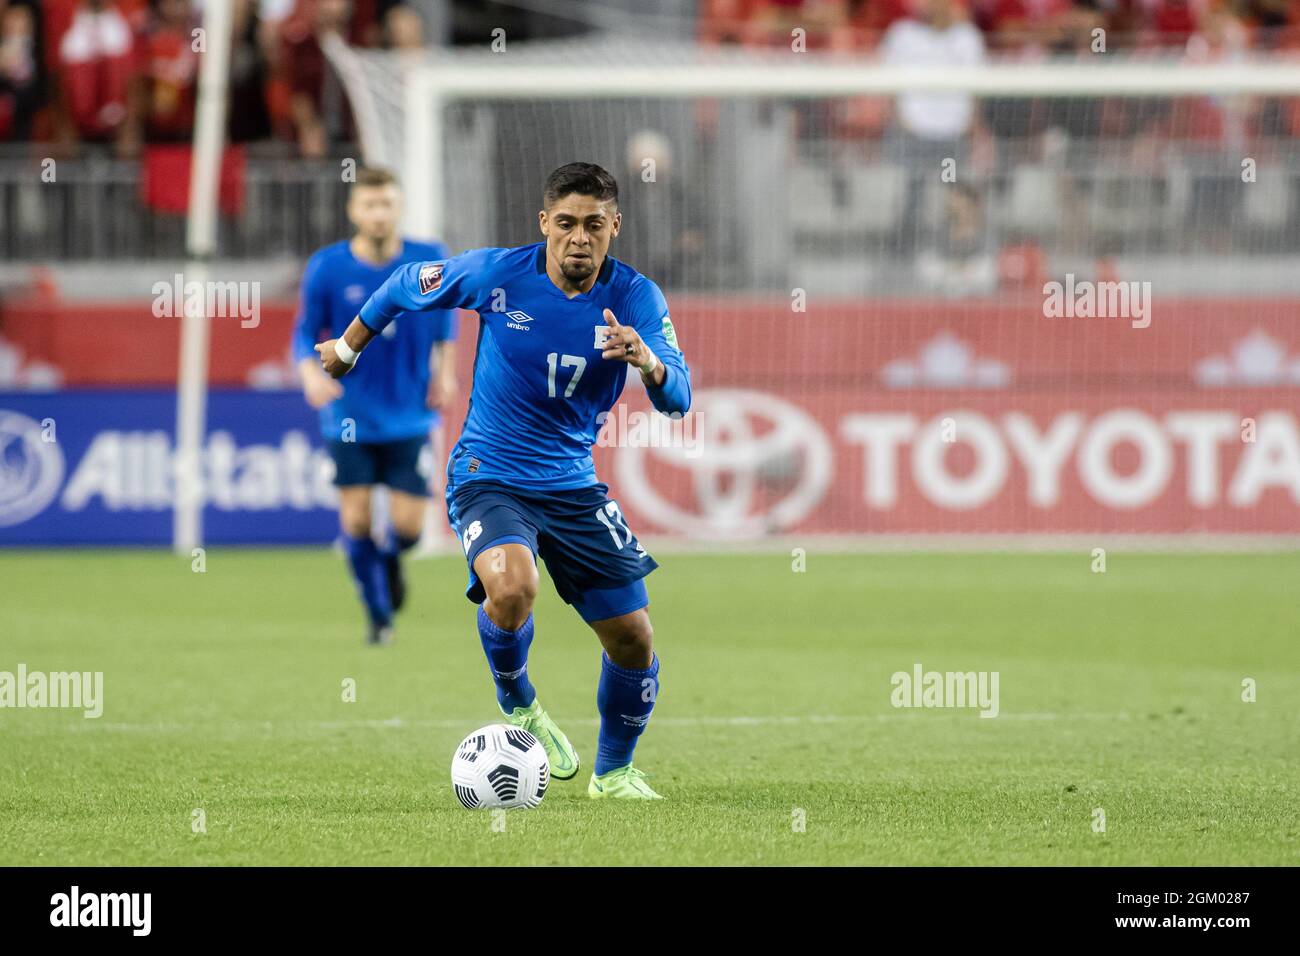 Toronto, Canada, September 8, 2021: Jairo Henríquez of Team El Salvador in action during the CONCACAF FIFA World Cup Qualifying 2022 match against Canada at BMO Field in Toronto, Canada. Canada won the match 3-0. Stock Photo